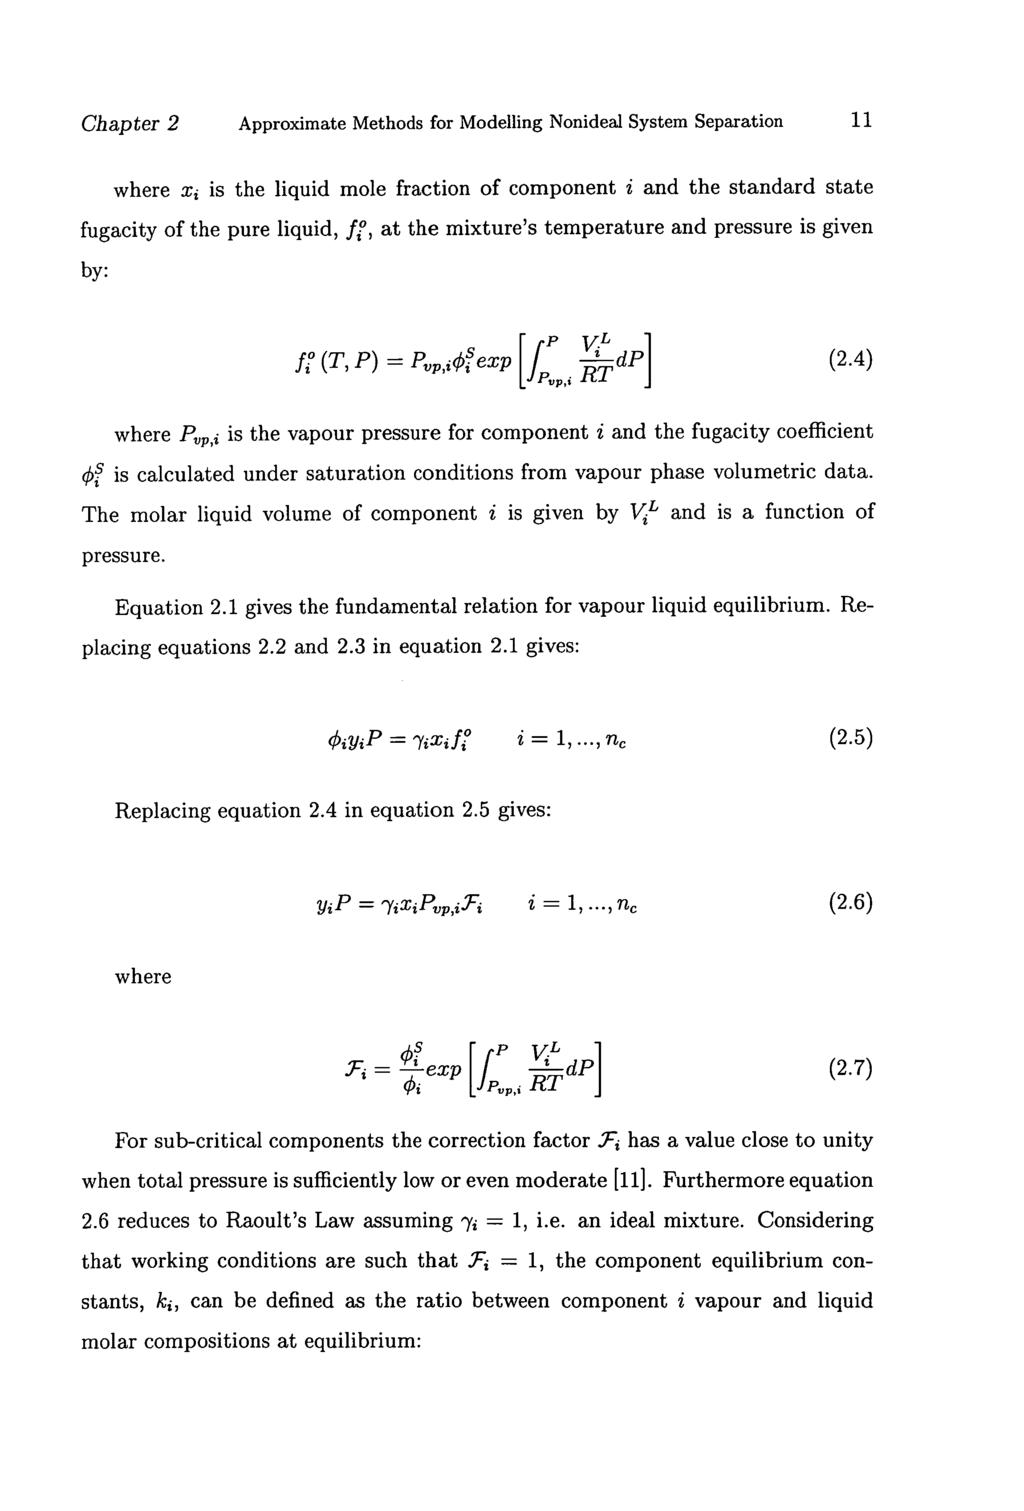 Chapter 2 Approximate Methods for Modelling Nonideal System Separation 11 where x 2 is the liquid mole fraction of component i and the standard state fugacity of the pure liquid, fj, at the mixture's